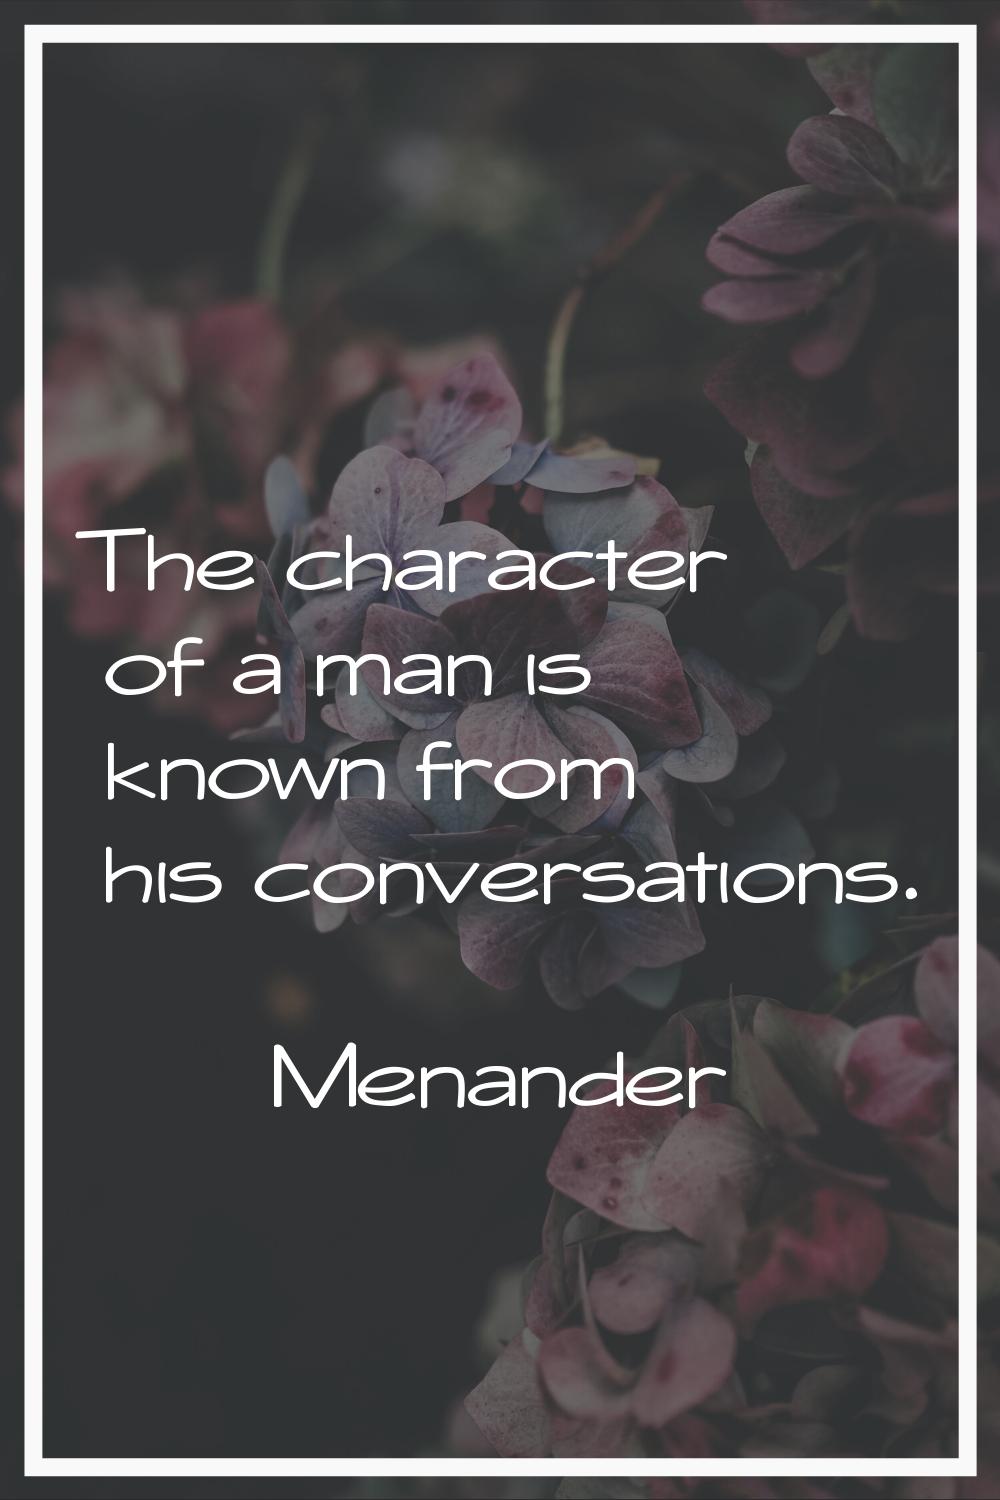 The character of a man is known from his conversations.